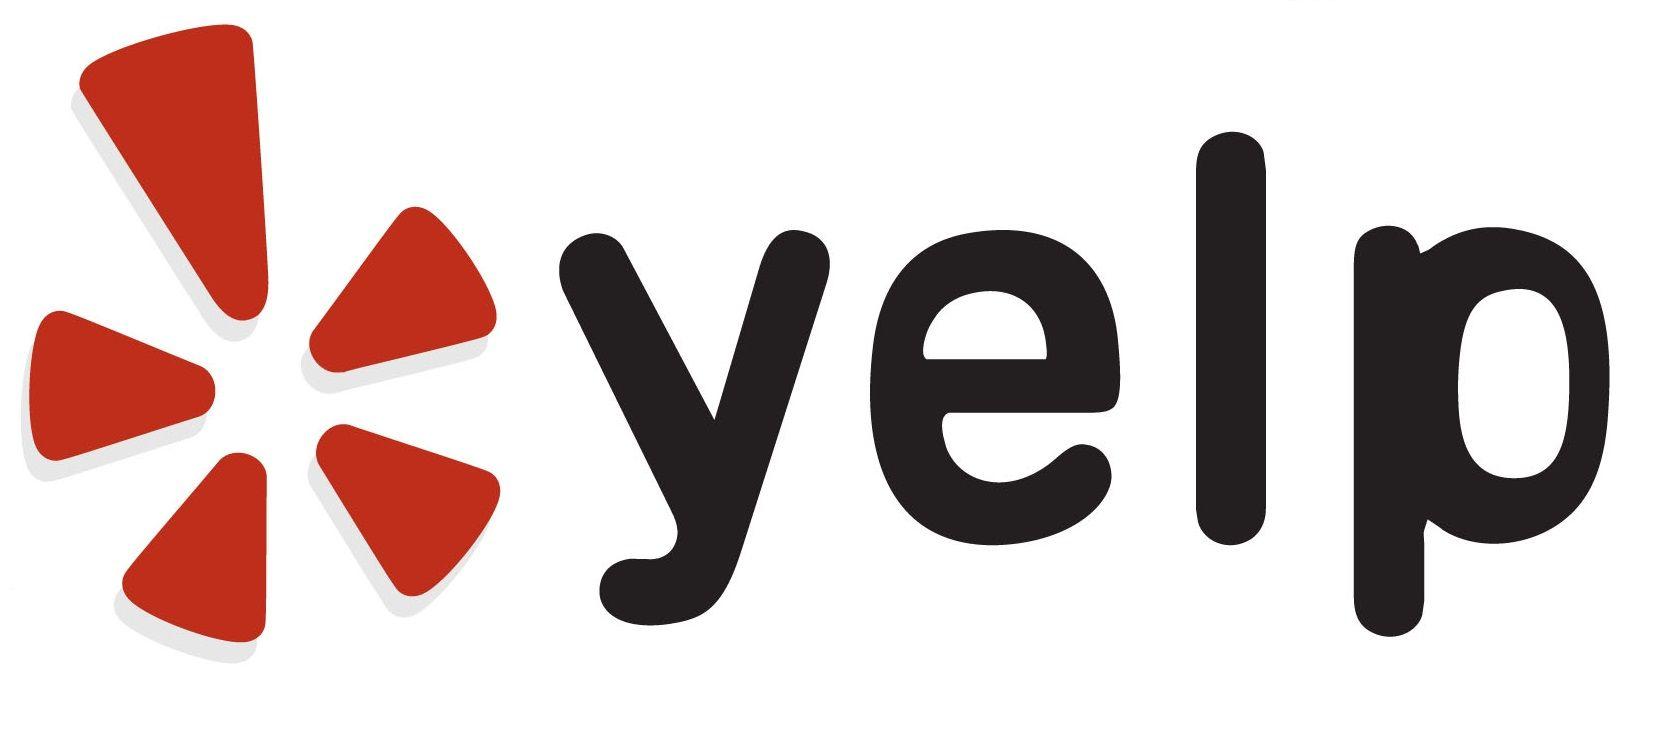 Yelp Transparent Logo - Yelp logo png royalty free - RR collections